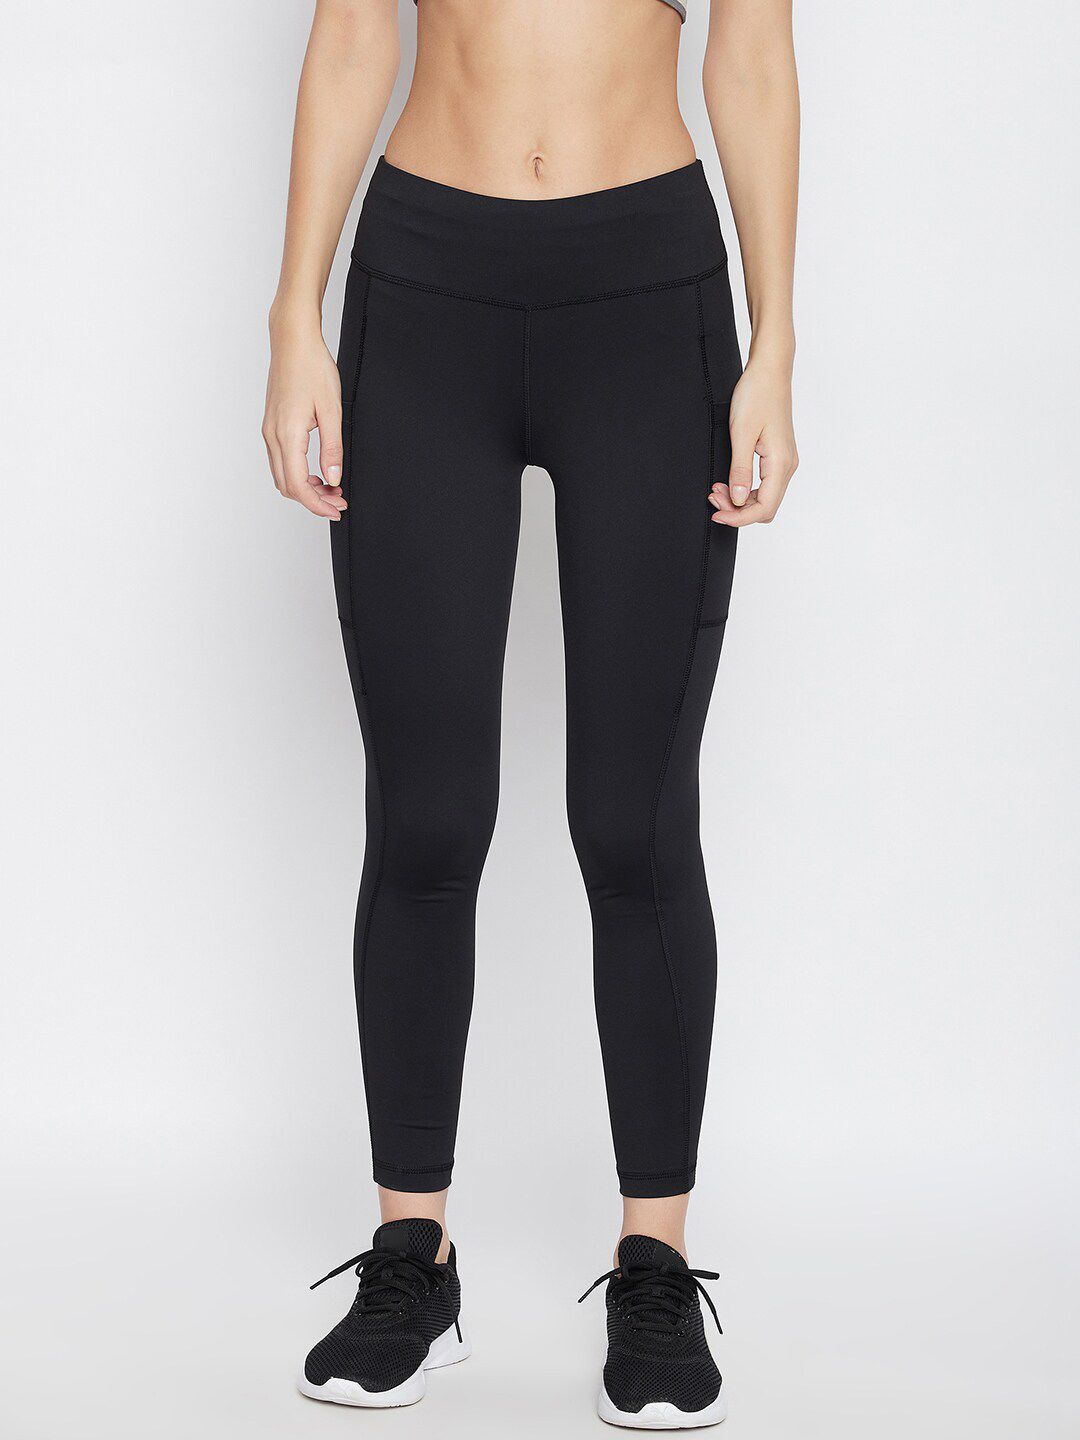 JUMP USA Women Solid Black Activewear Gym Tights Price in India